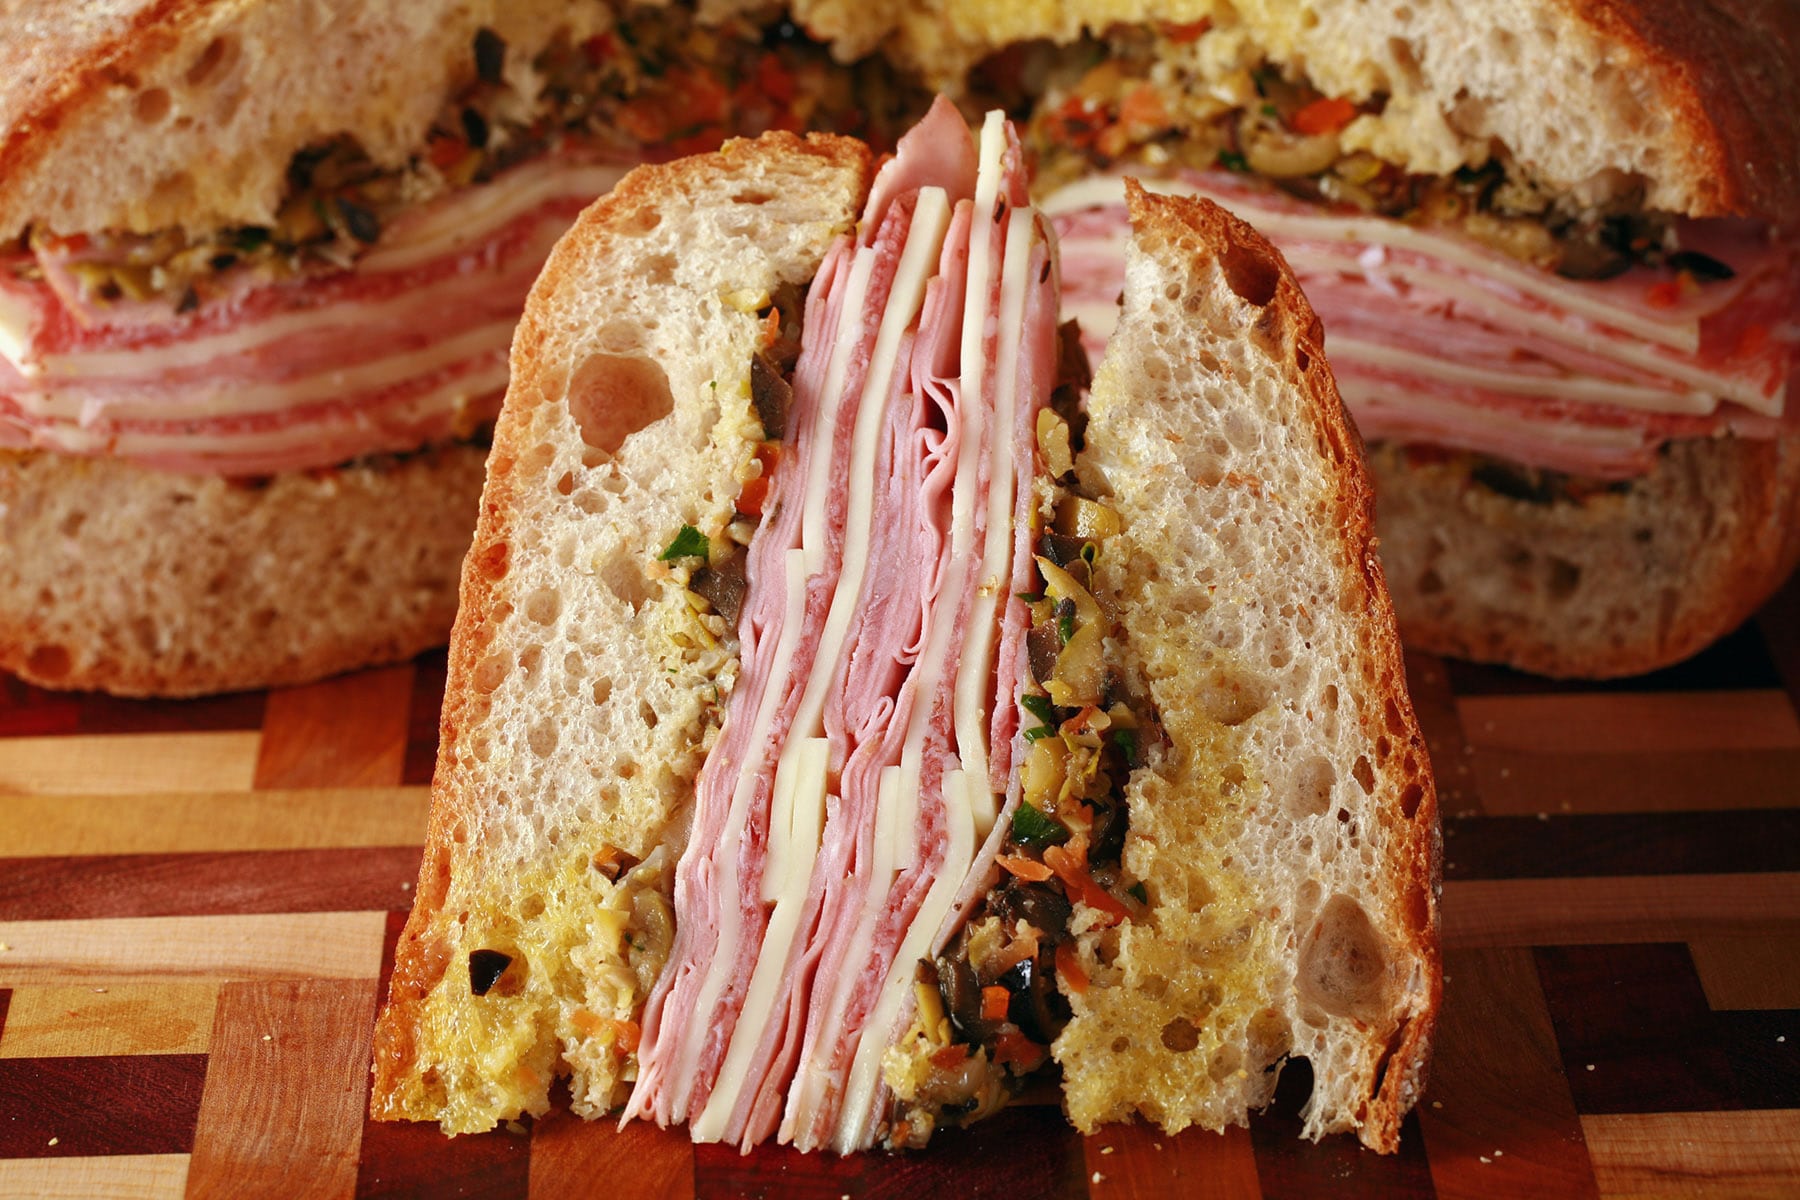 A close up view of a wedge of Muffaletta sandwich, with the remaining loaf behind it.